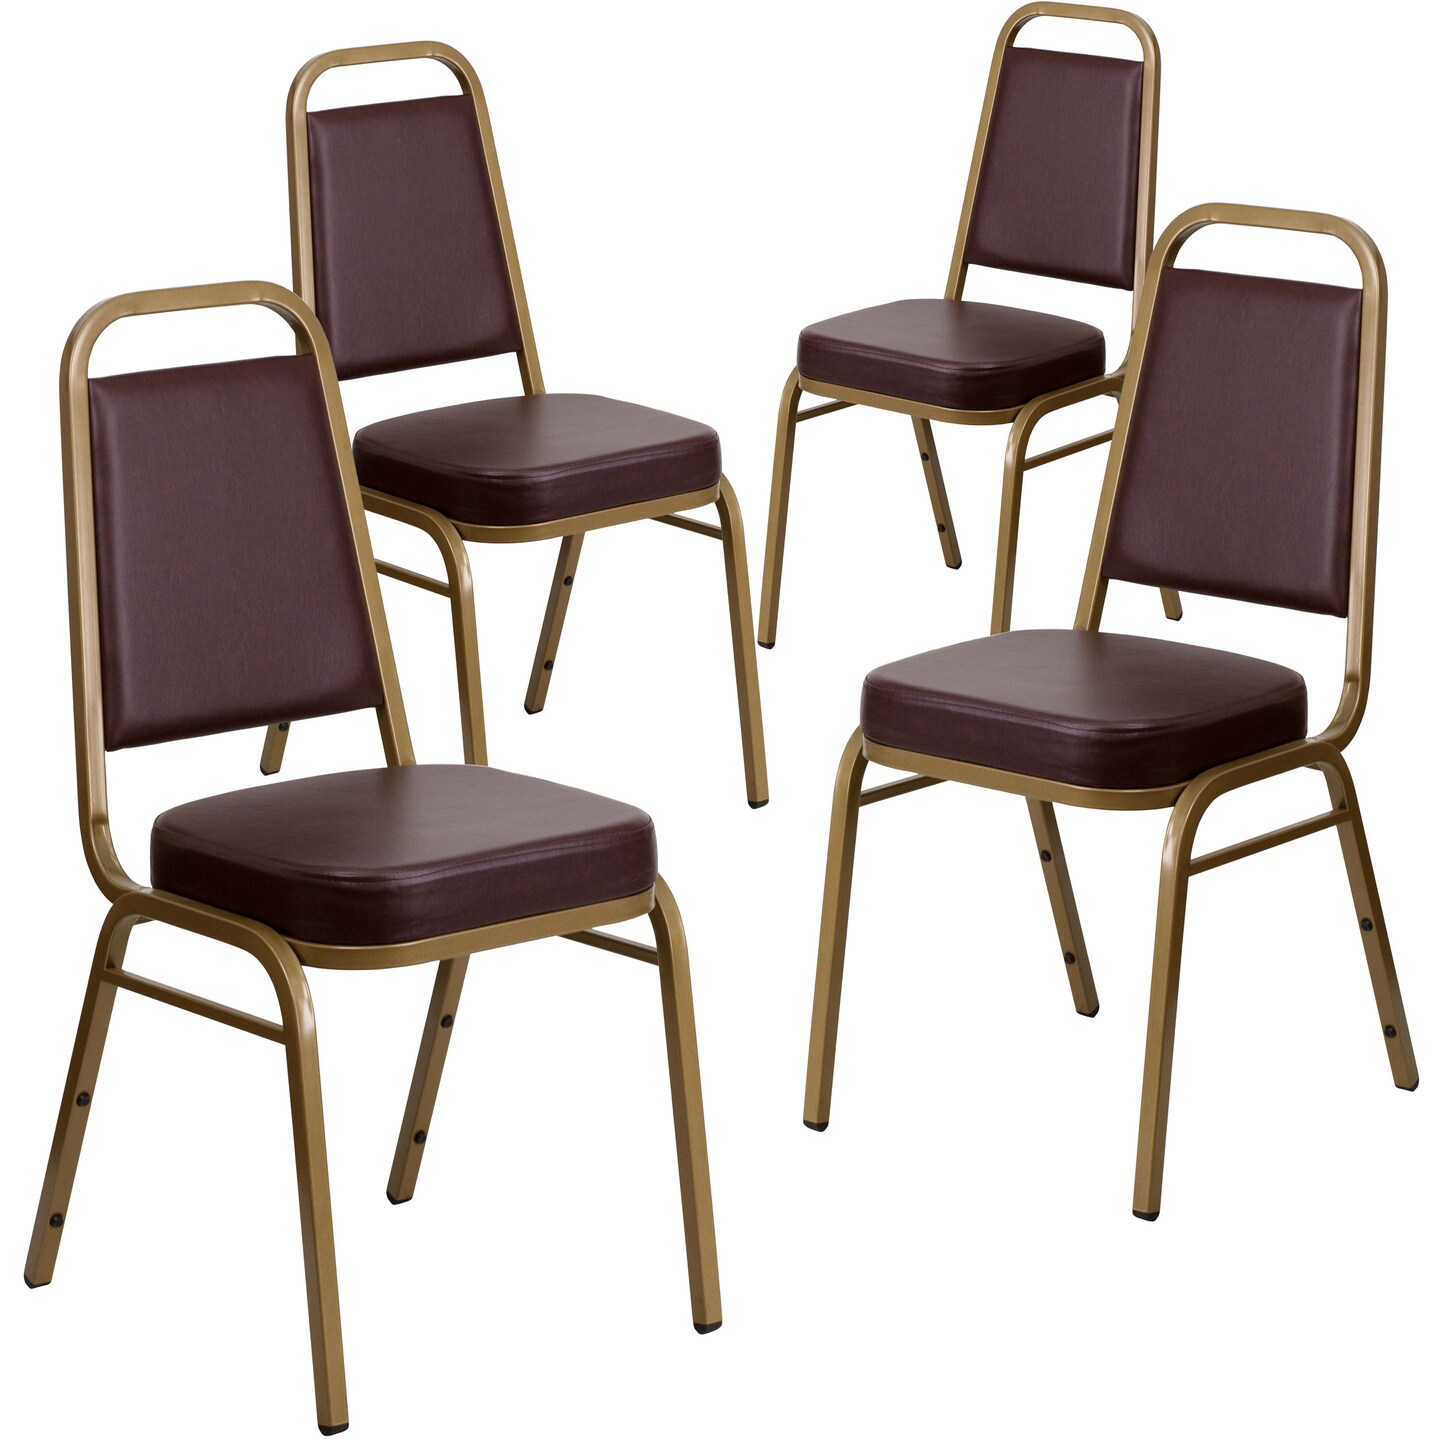 Stacking Chairs, Banquet Chairs, Hotel Ballroom Chair